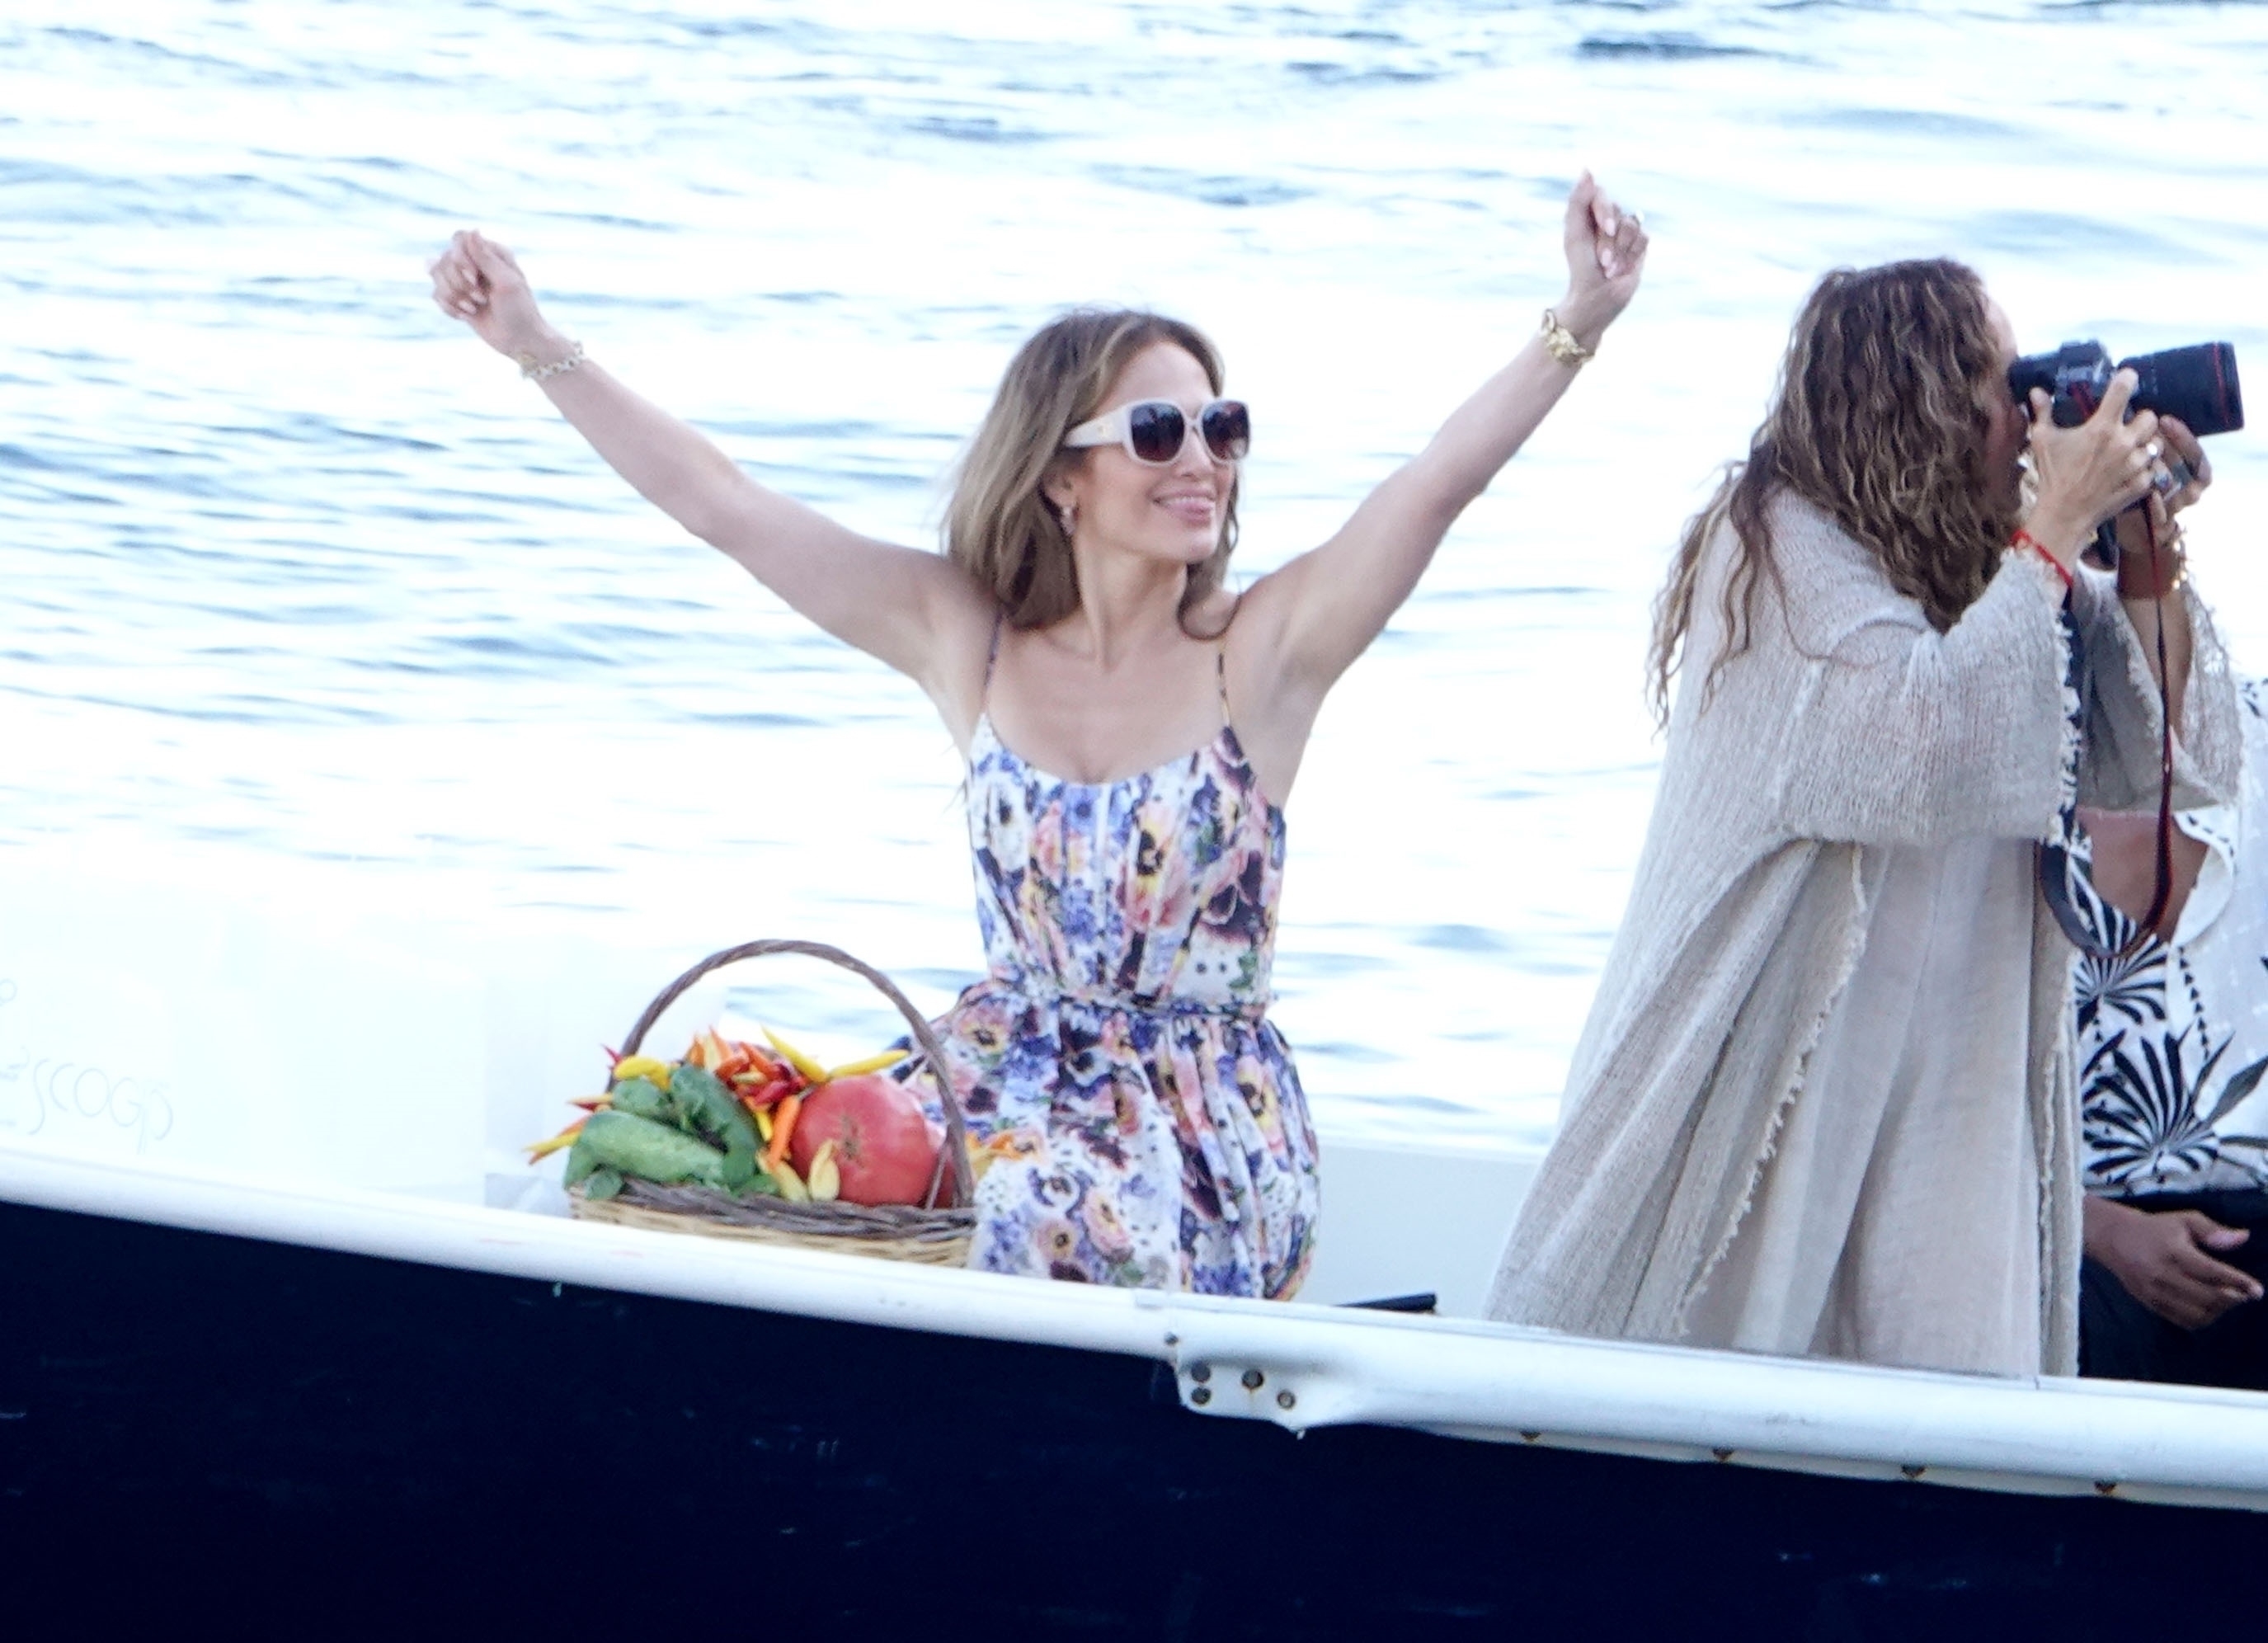 <p>After enjoying a little fine dining with friends at Ristorante Lo Scoglio, <a href="https://www.wonderwall.com/celebrity/profiles/overview/jennifer-lopez-307.article">Jennifer Lopez</a> was all smiles as she left the restaurant via boat during a holiday on Italy's Amalfi Coast on Aug. 10.</p>